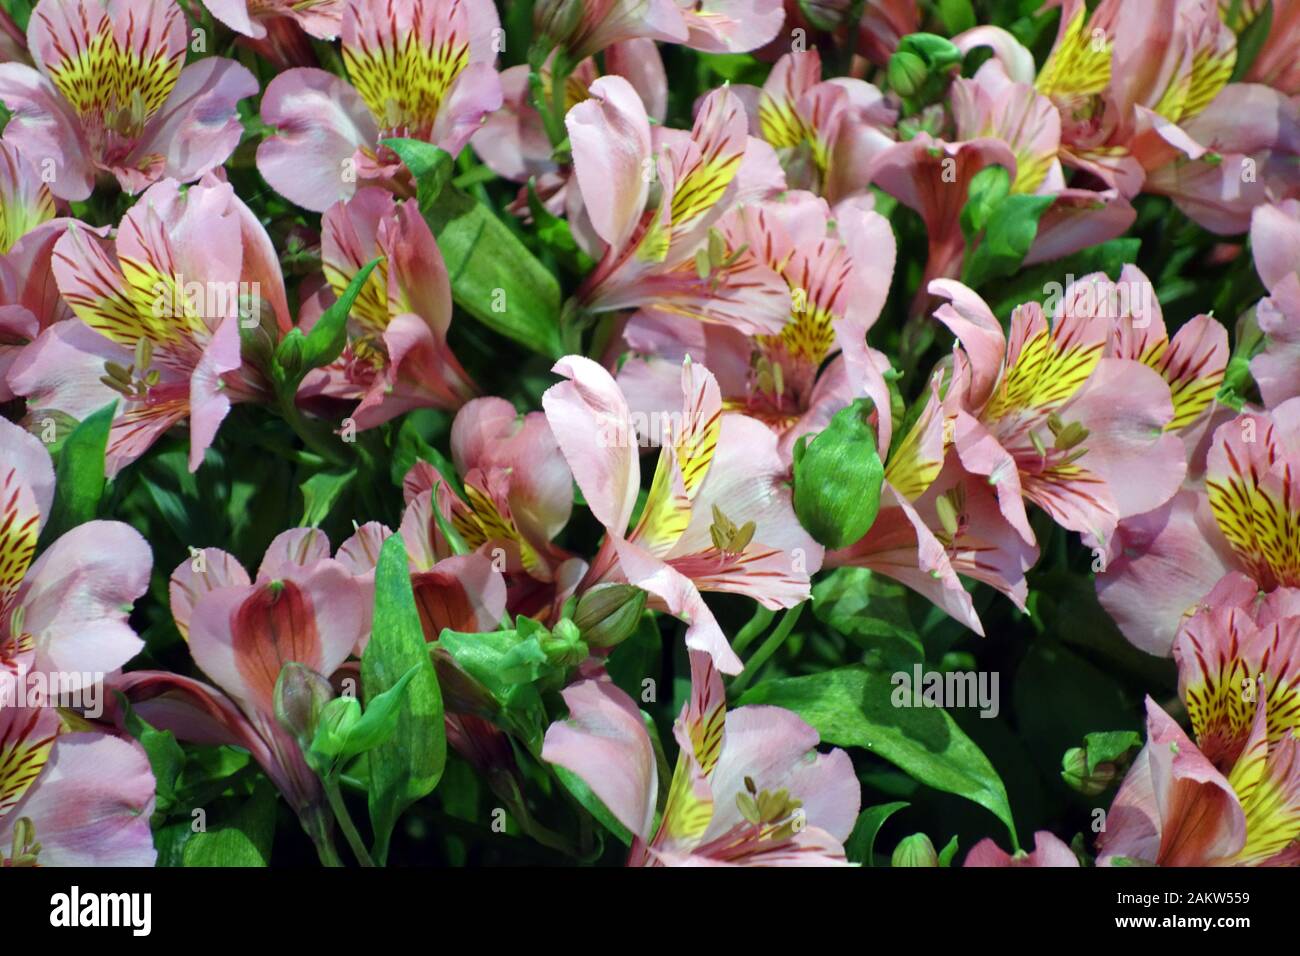 Salmon-pink  Alstroemeria 'Charm' (Peruvian Lily) Flowers on Display at the Harrogate Spring Flower Show. Yorkshire, England, UK. Stock Photo